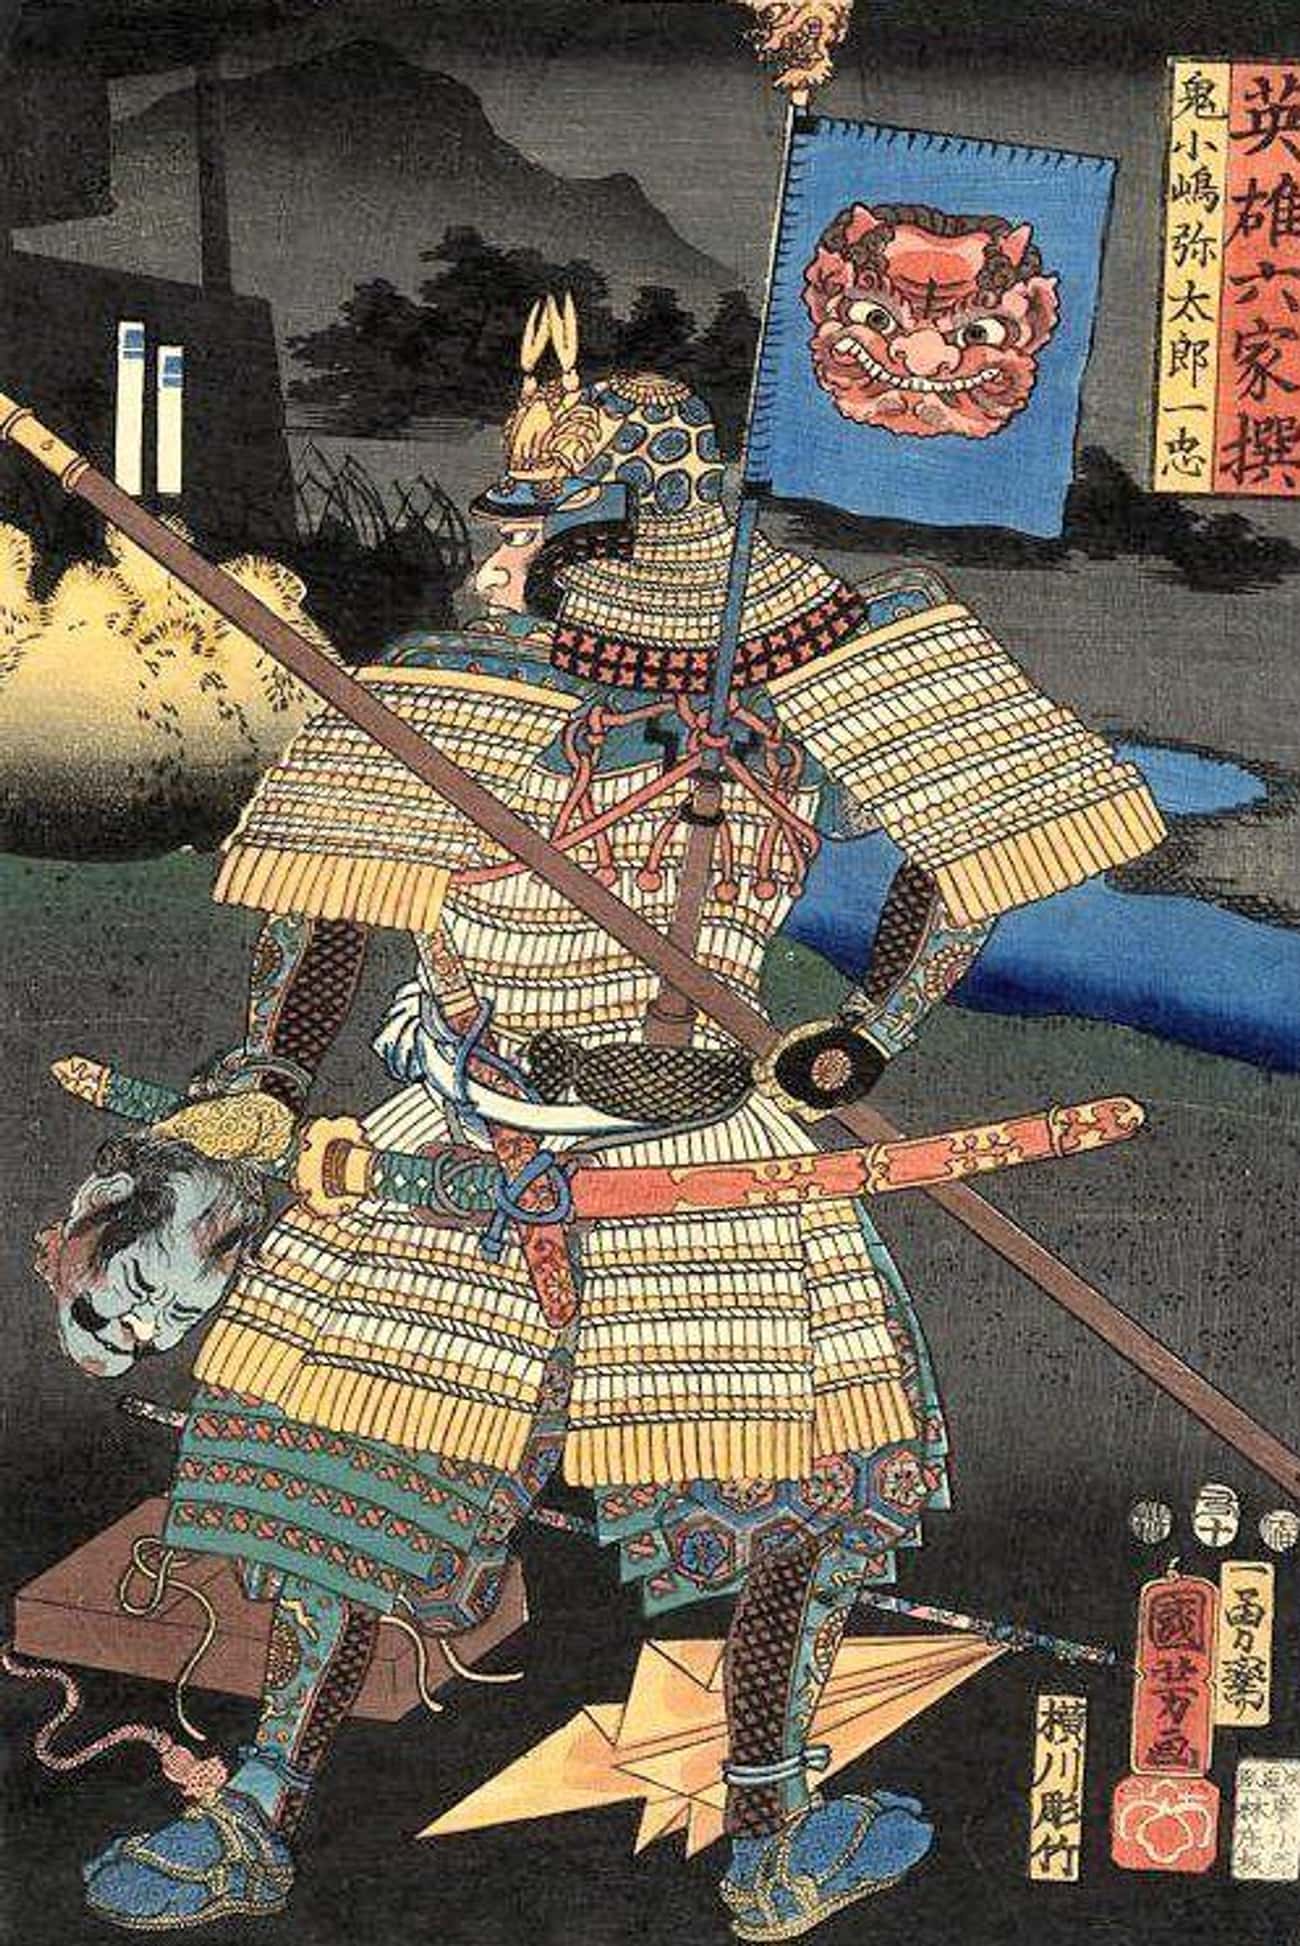 Clan Conflict Led To A Monumental War In 12th-Century Japan